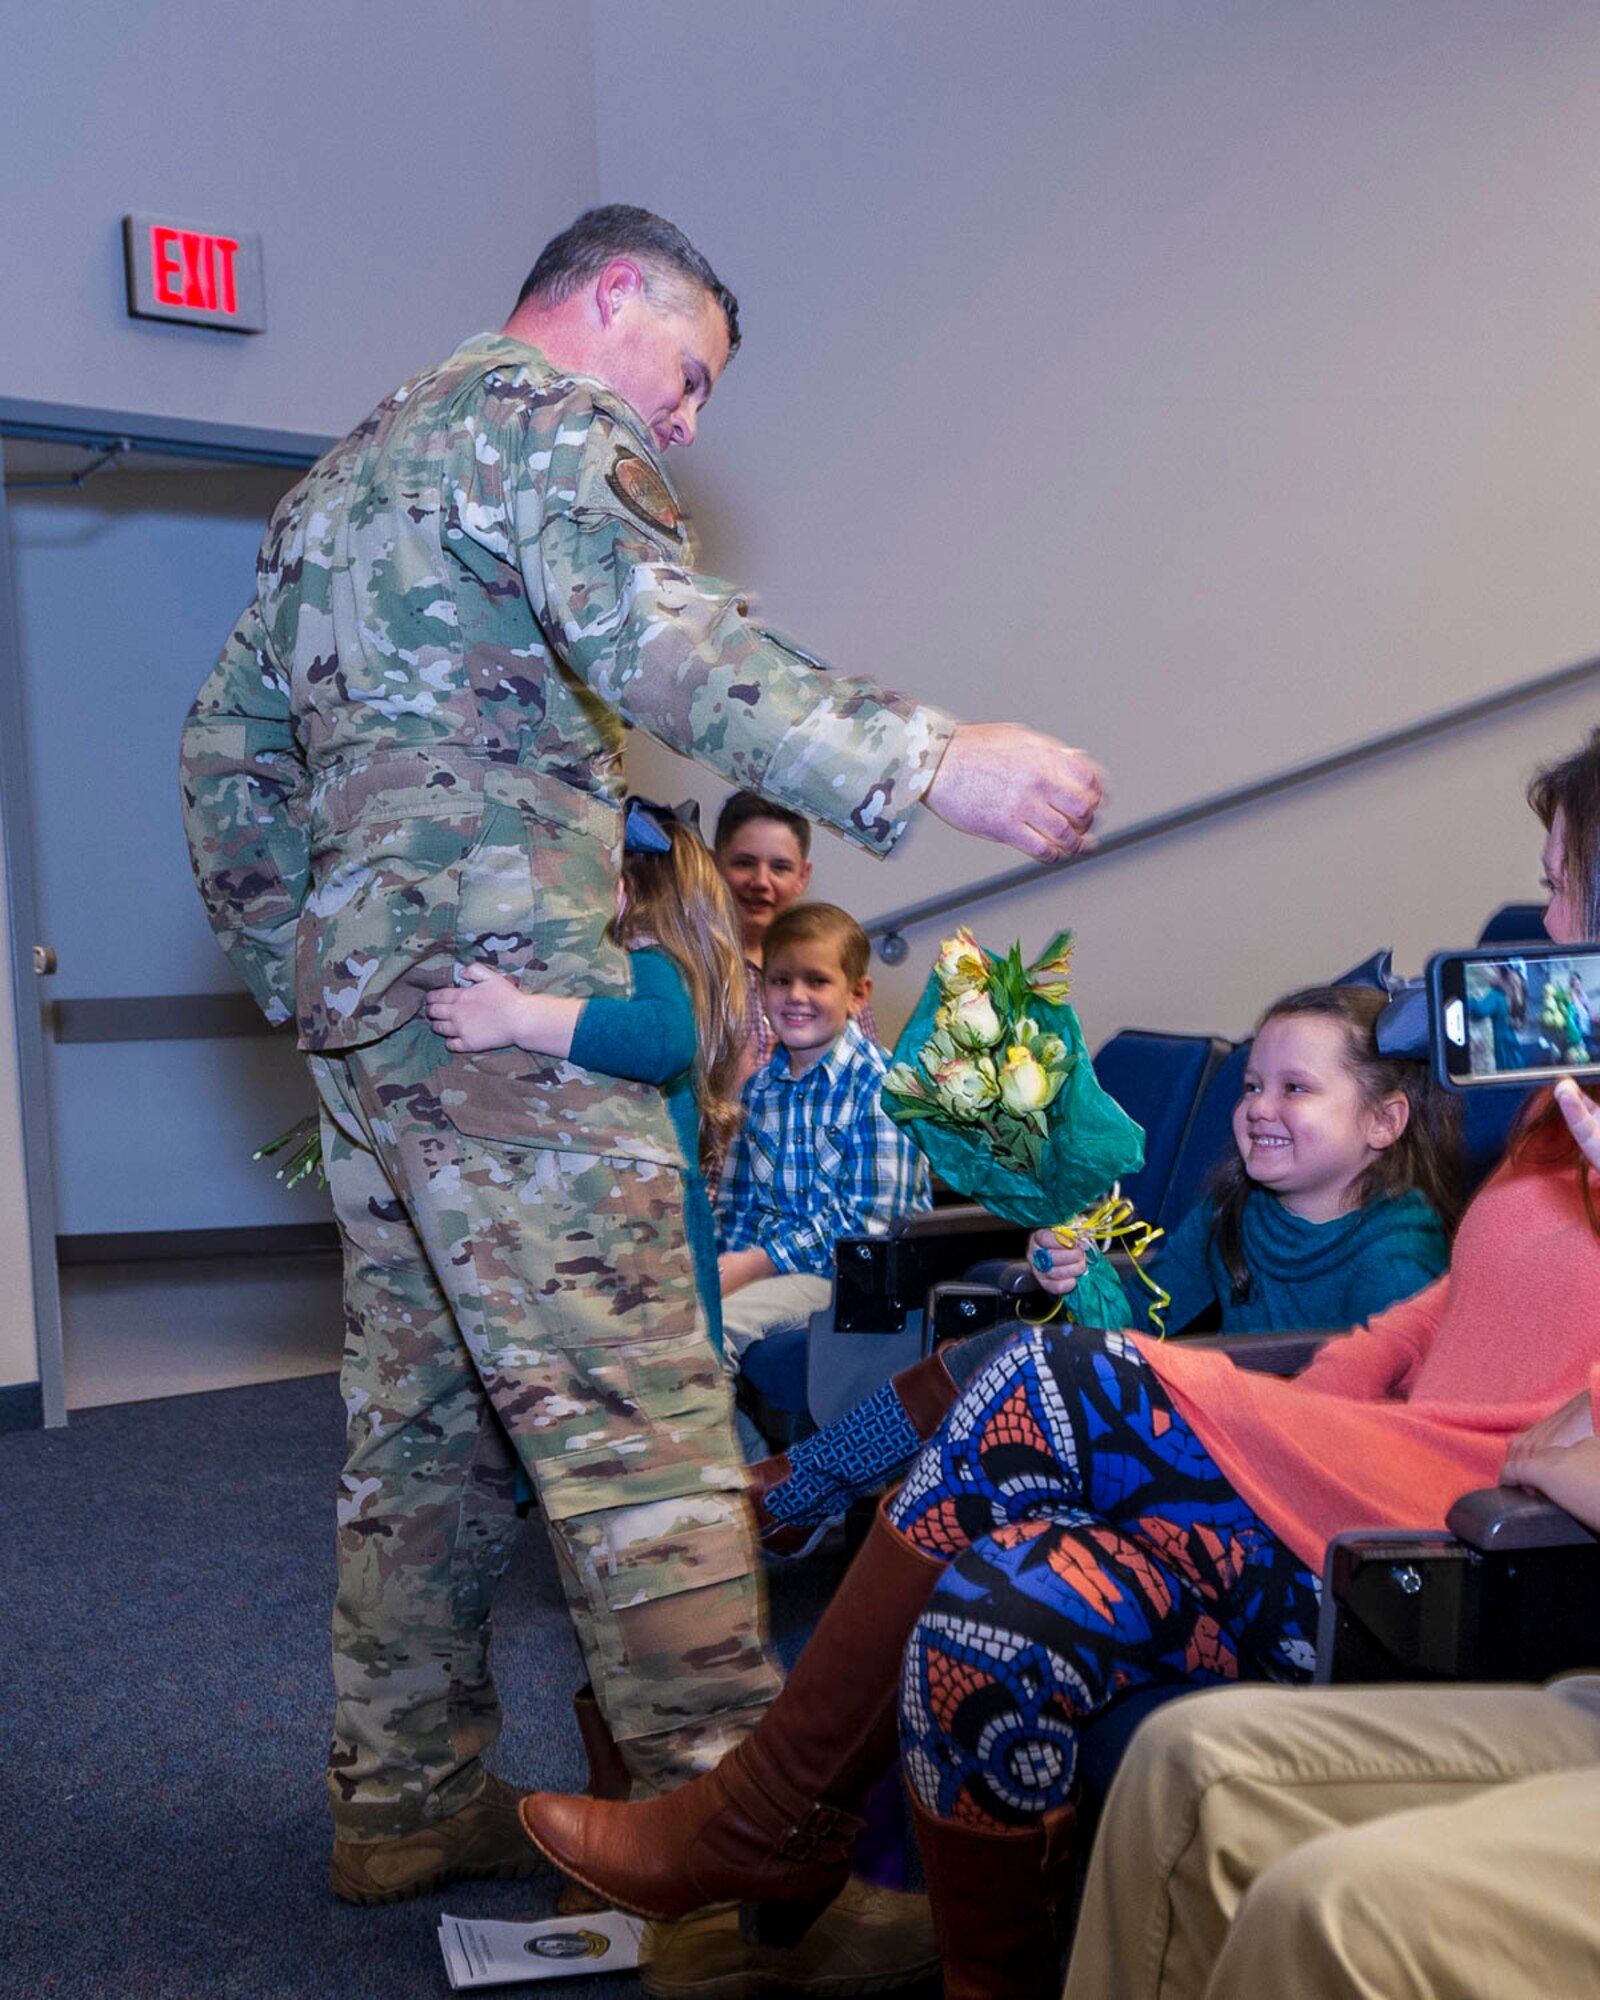 Lt. Col. Jeremy Wagner, 327th Airlift Squadron commander, presents flowers to his family during an assumption of command ceremony on Nov. 2, 2019, at Little Rock Air Force Base, Ark. Previous to his current assignment, Lt. Col. Wagner was the chief pilot for the unit. (U.S. Air Force Reserve photo by Maj. Ashley Walker)